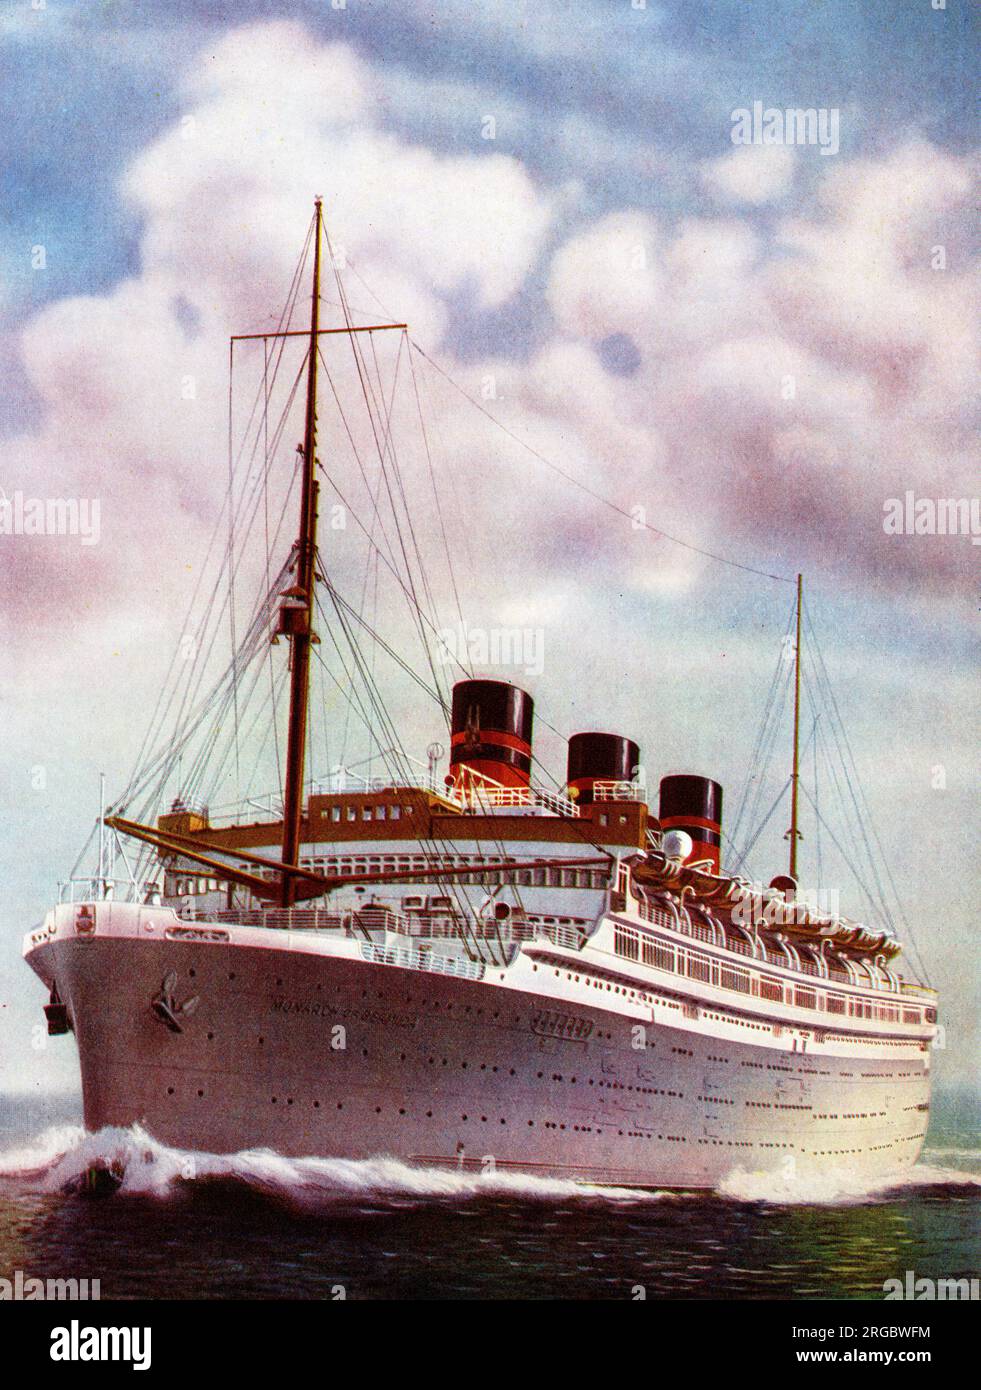 Monarch of Bermuda, Furness Withy liner Stock Photo